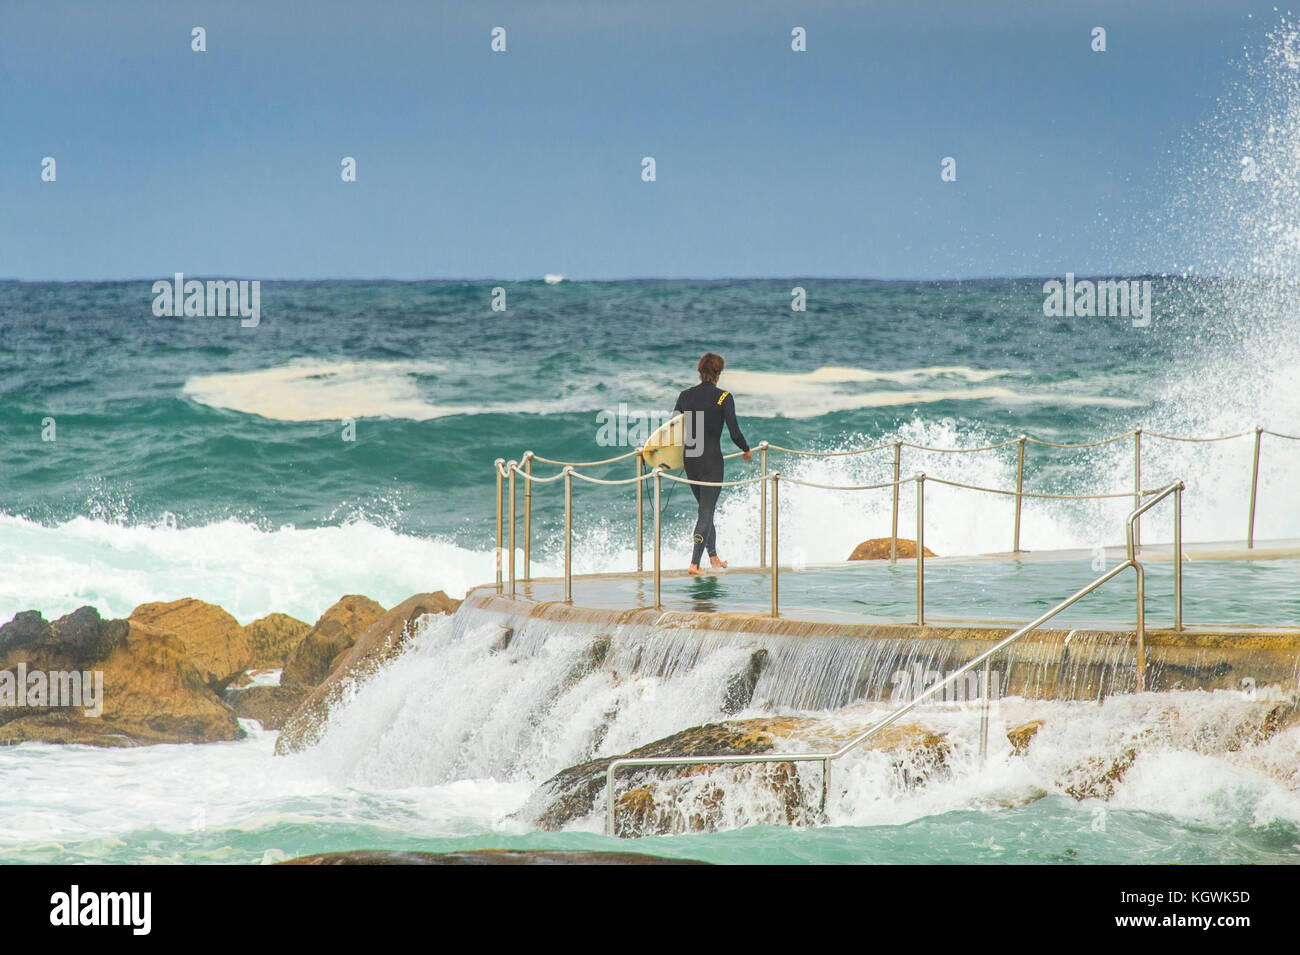 A male surfer waits for the right time to enter the water from the Bronte Beach rock pool in Sydney, NSW, Australia in big surf conditions Stock Photo